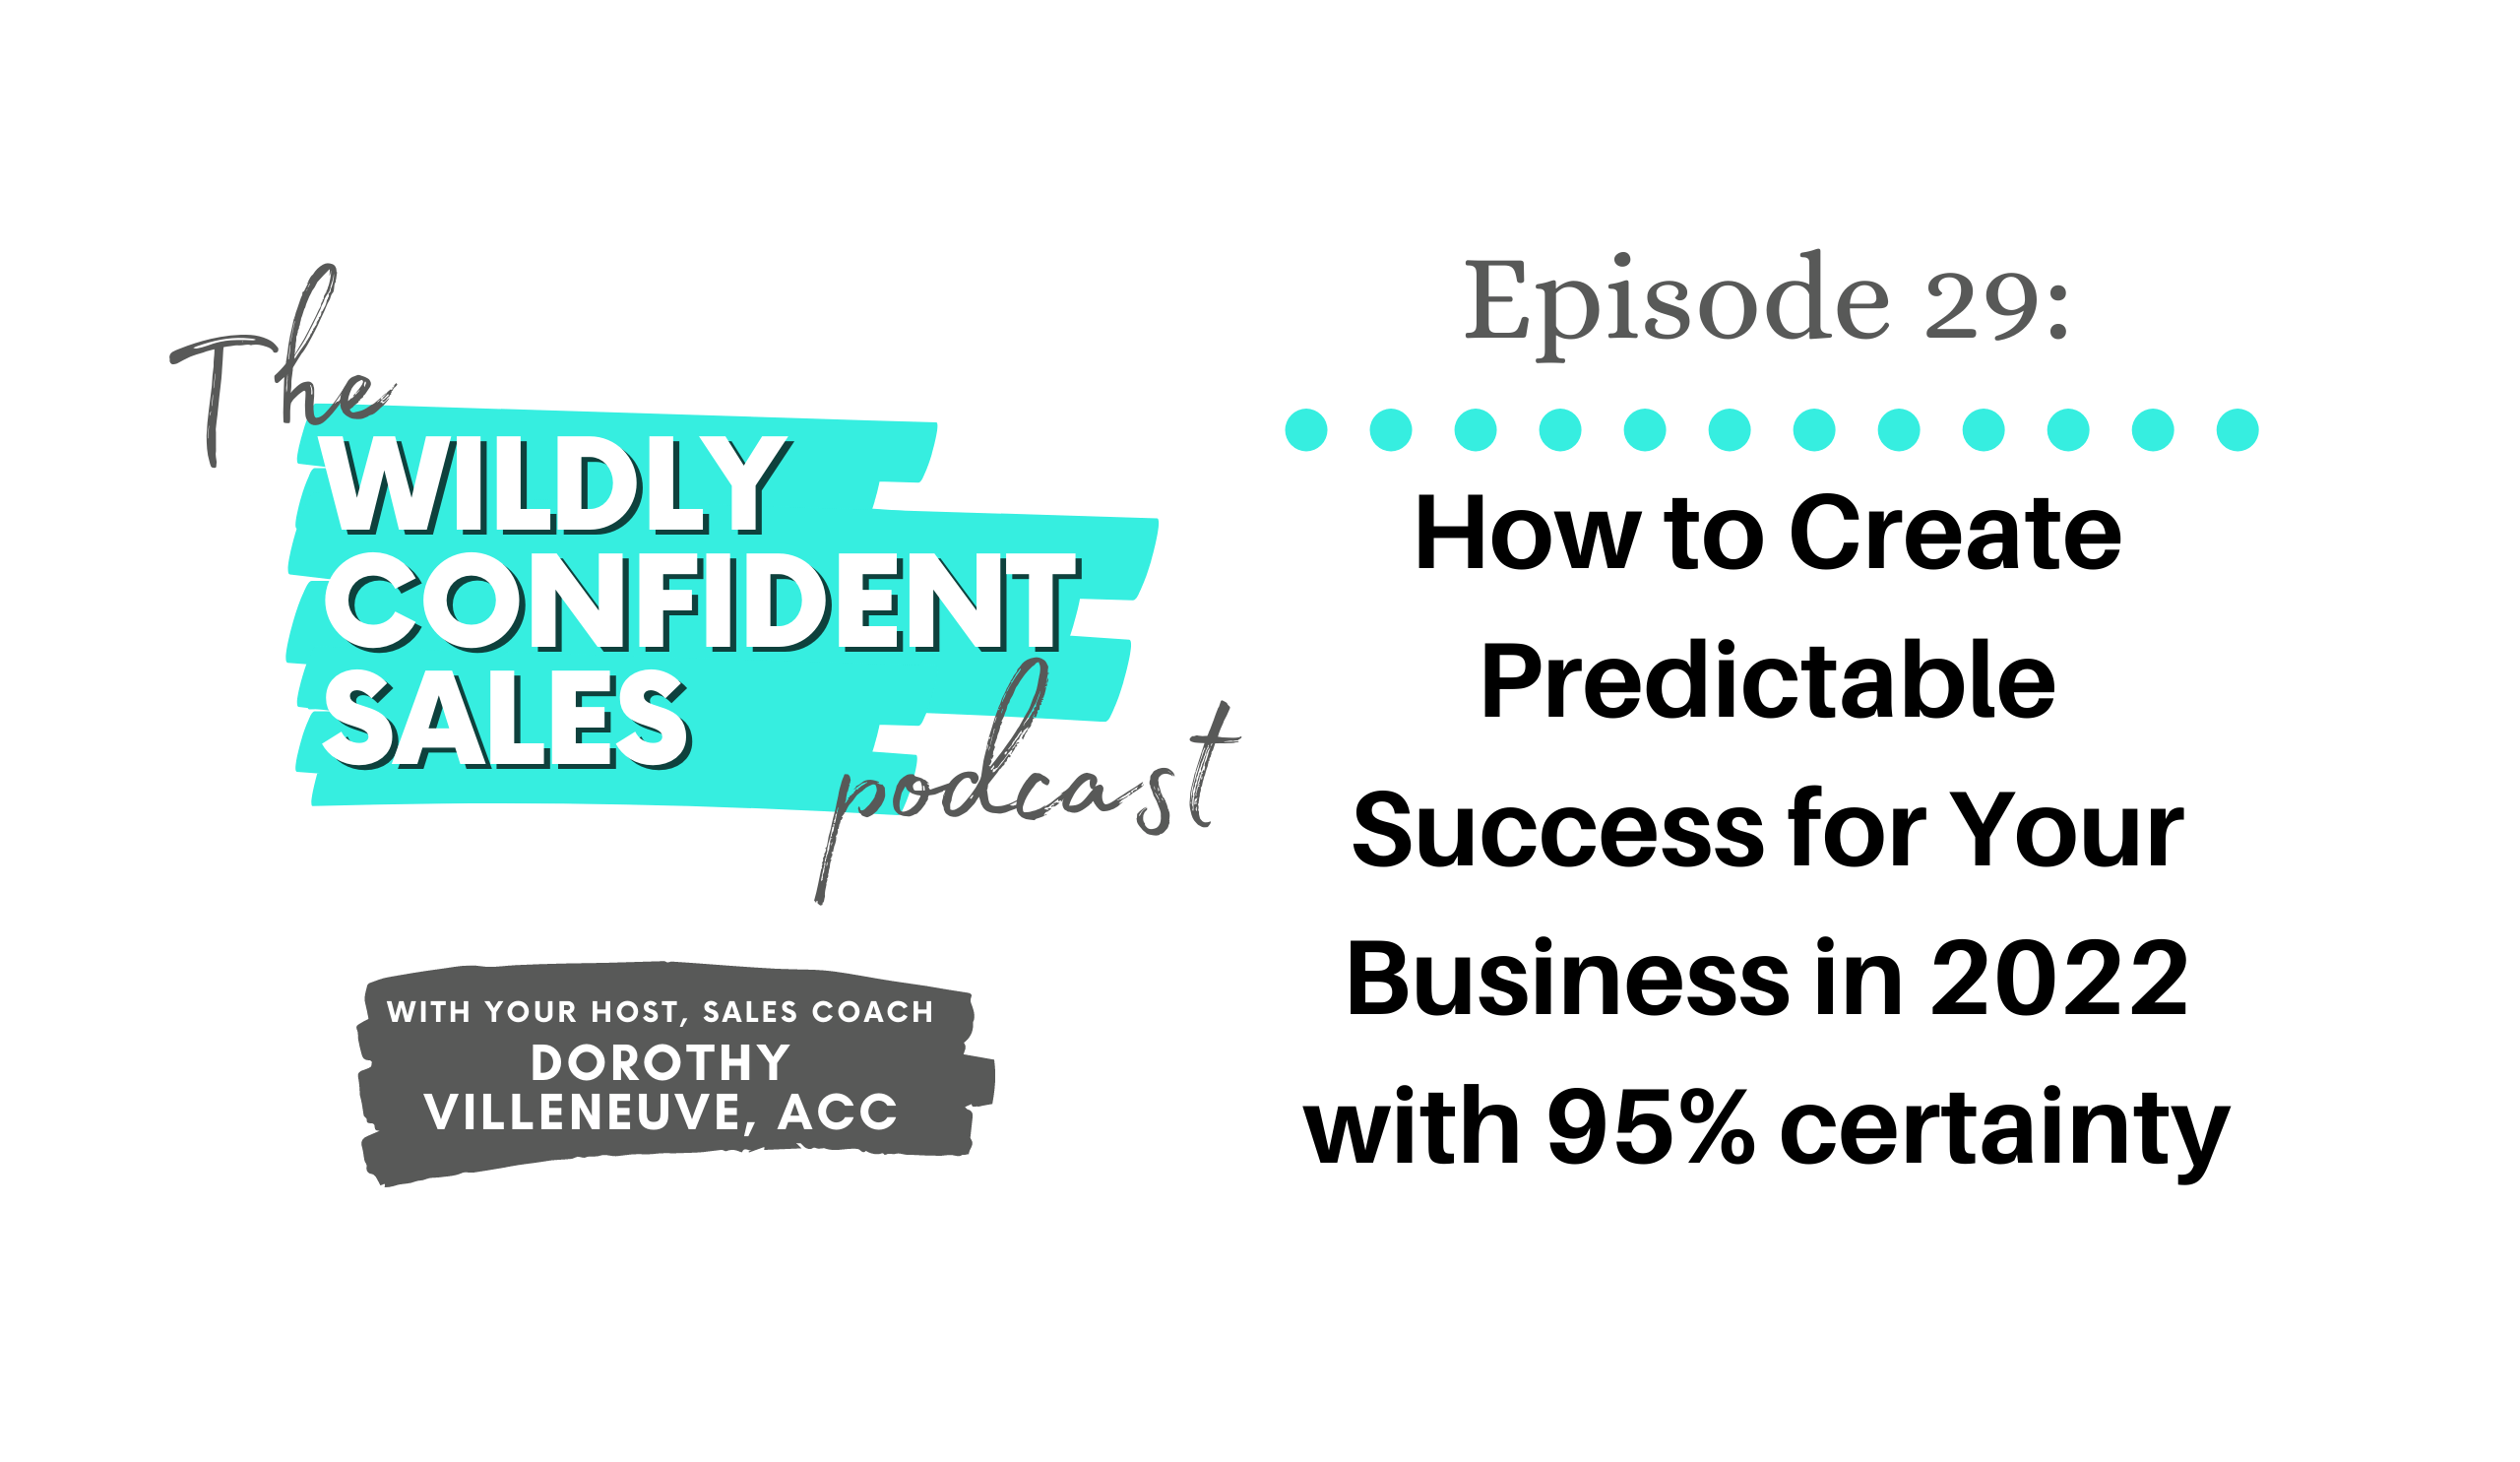 How to Create Predictable Success for Your Business in 2022 with 95% certainty